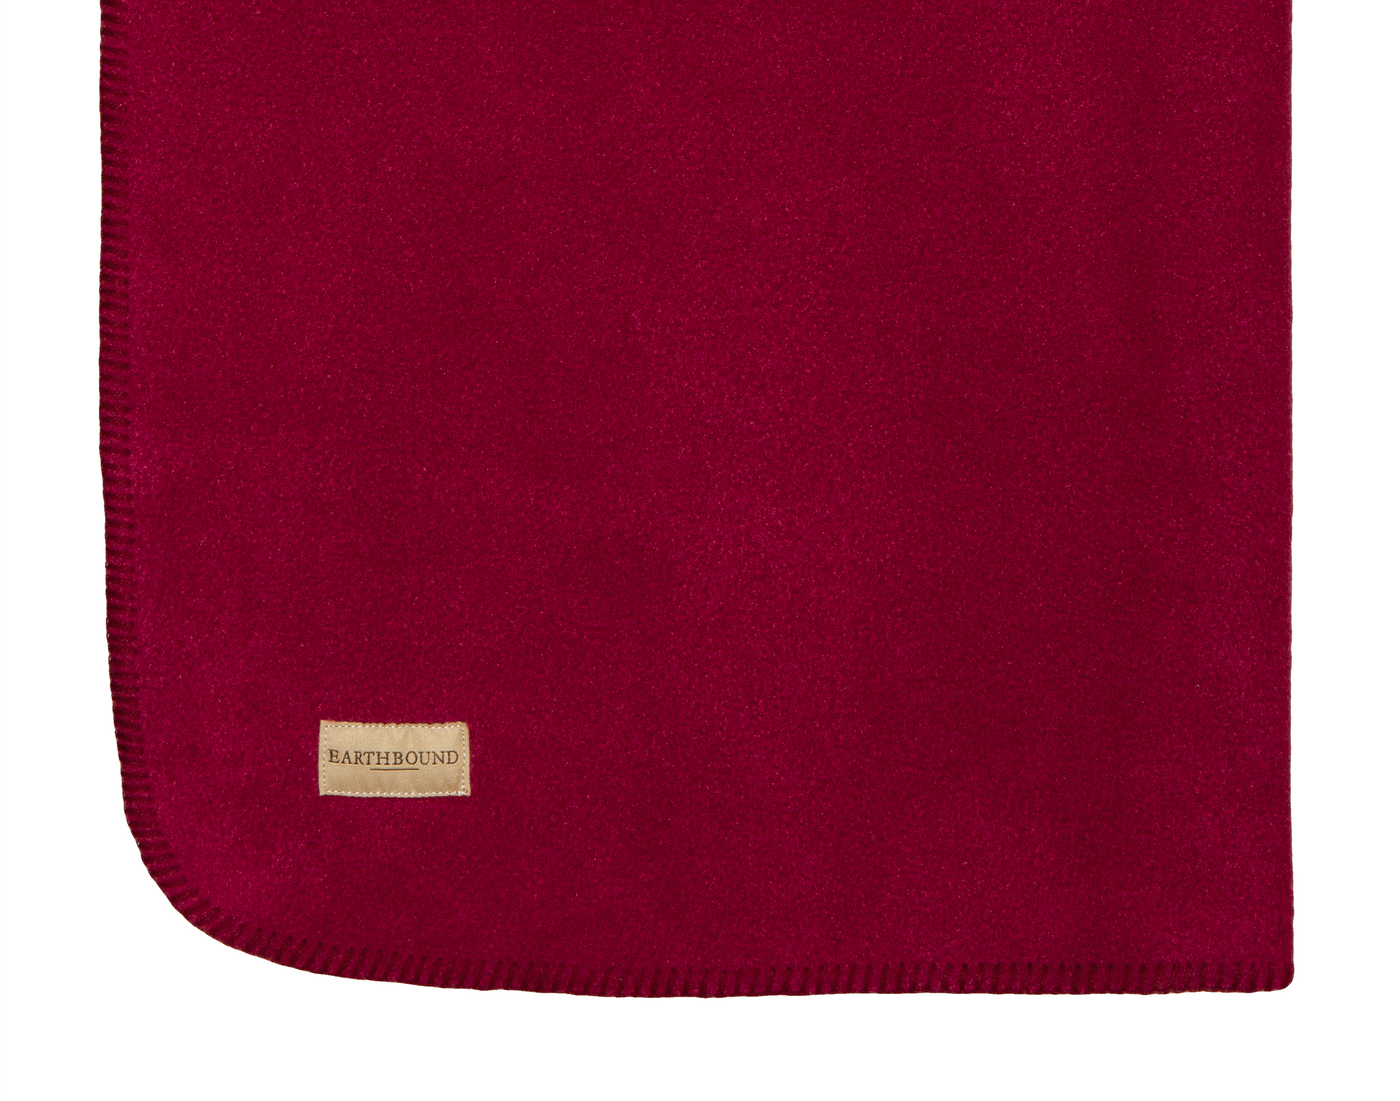 Close up of stitched fleece pet blanket in burgundy and burgundy thread